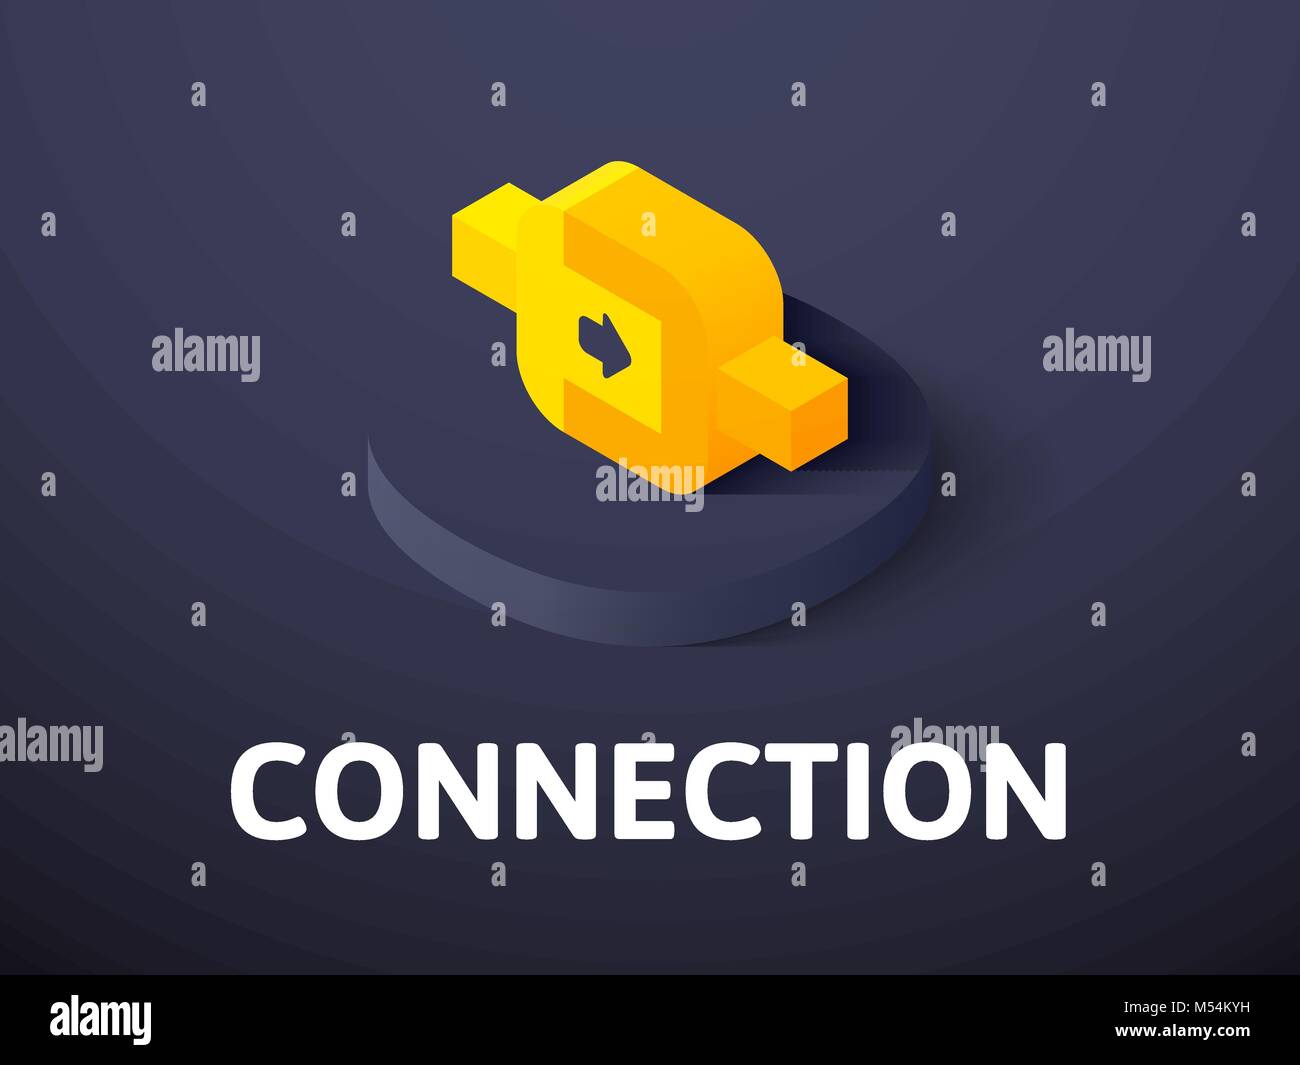 Connection isometric icon, isolated on color background Stock Vector